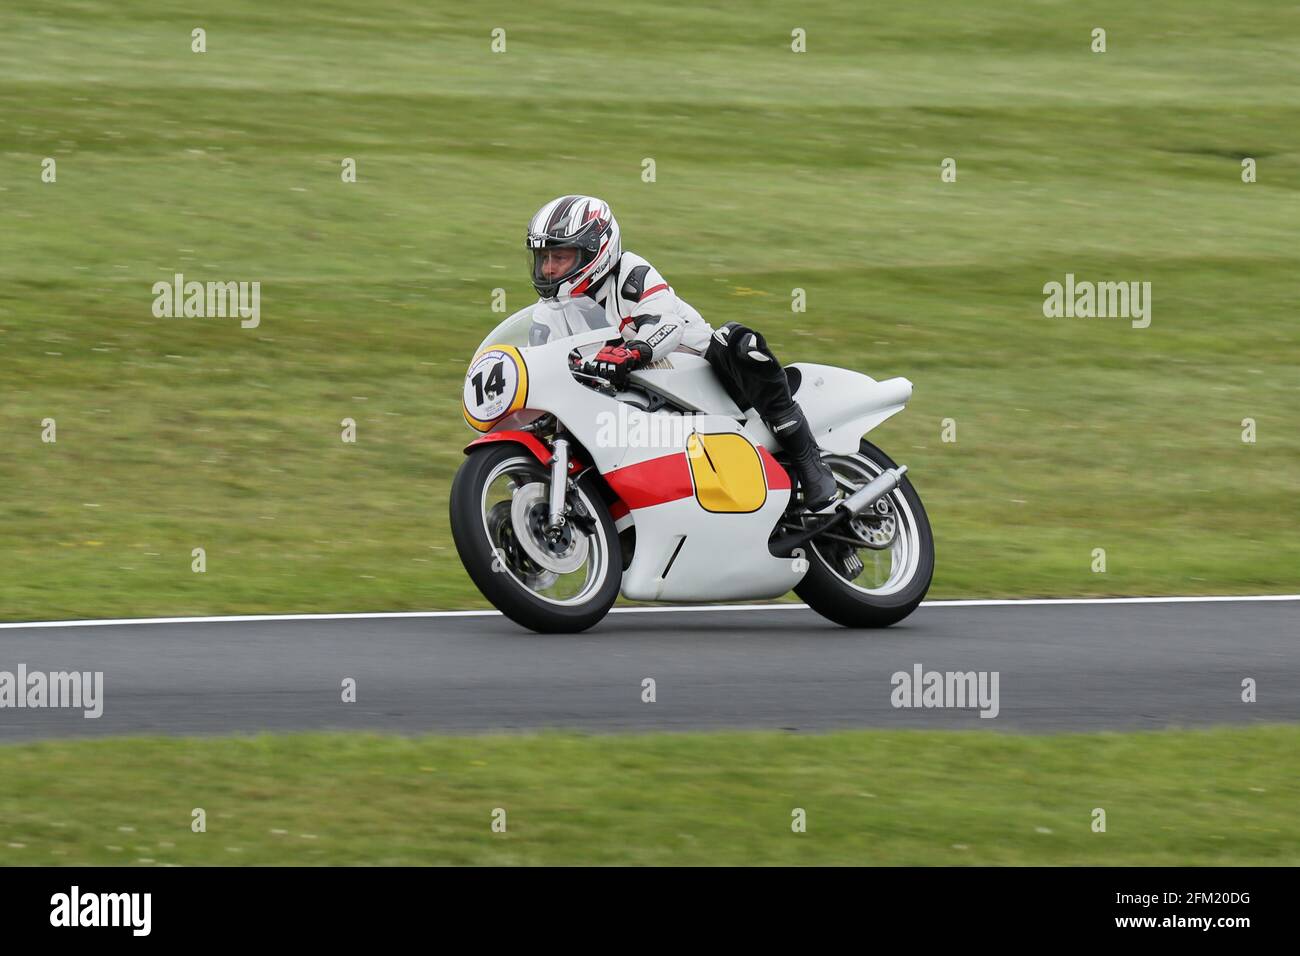 Ian Burnett approaches The Gooseneck on his Yamaha TZ500 during The Mountain Parade at the Cadwell Park International Classic in July 2015 Stock Photo